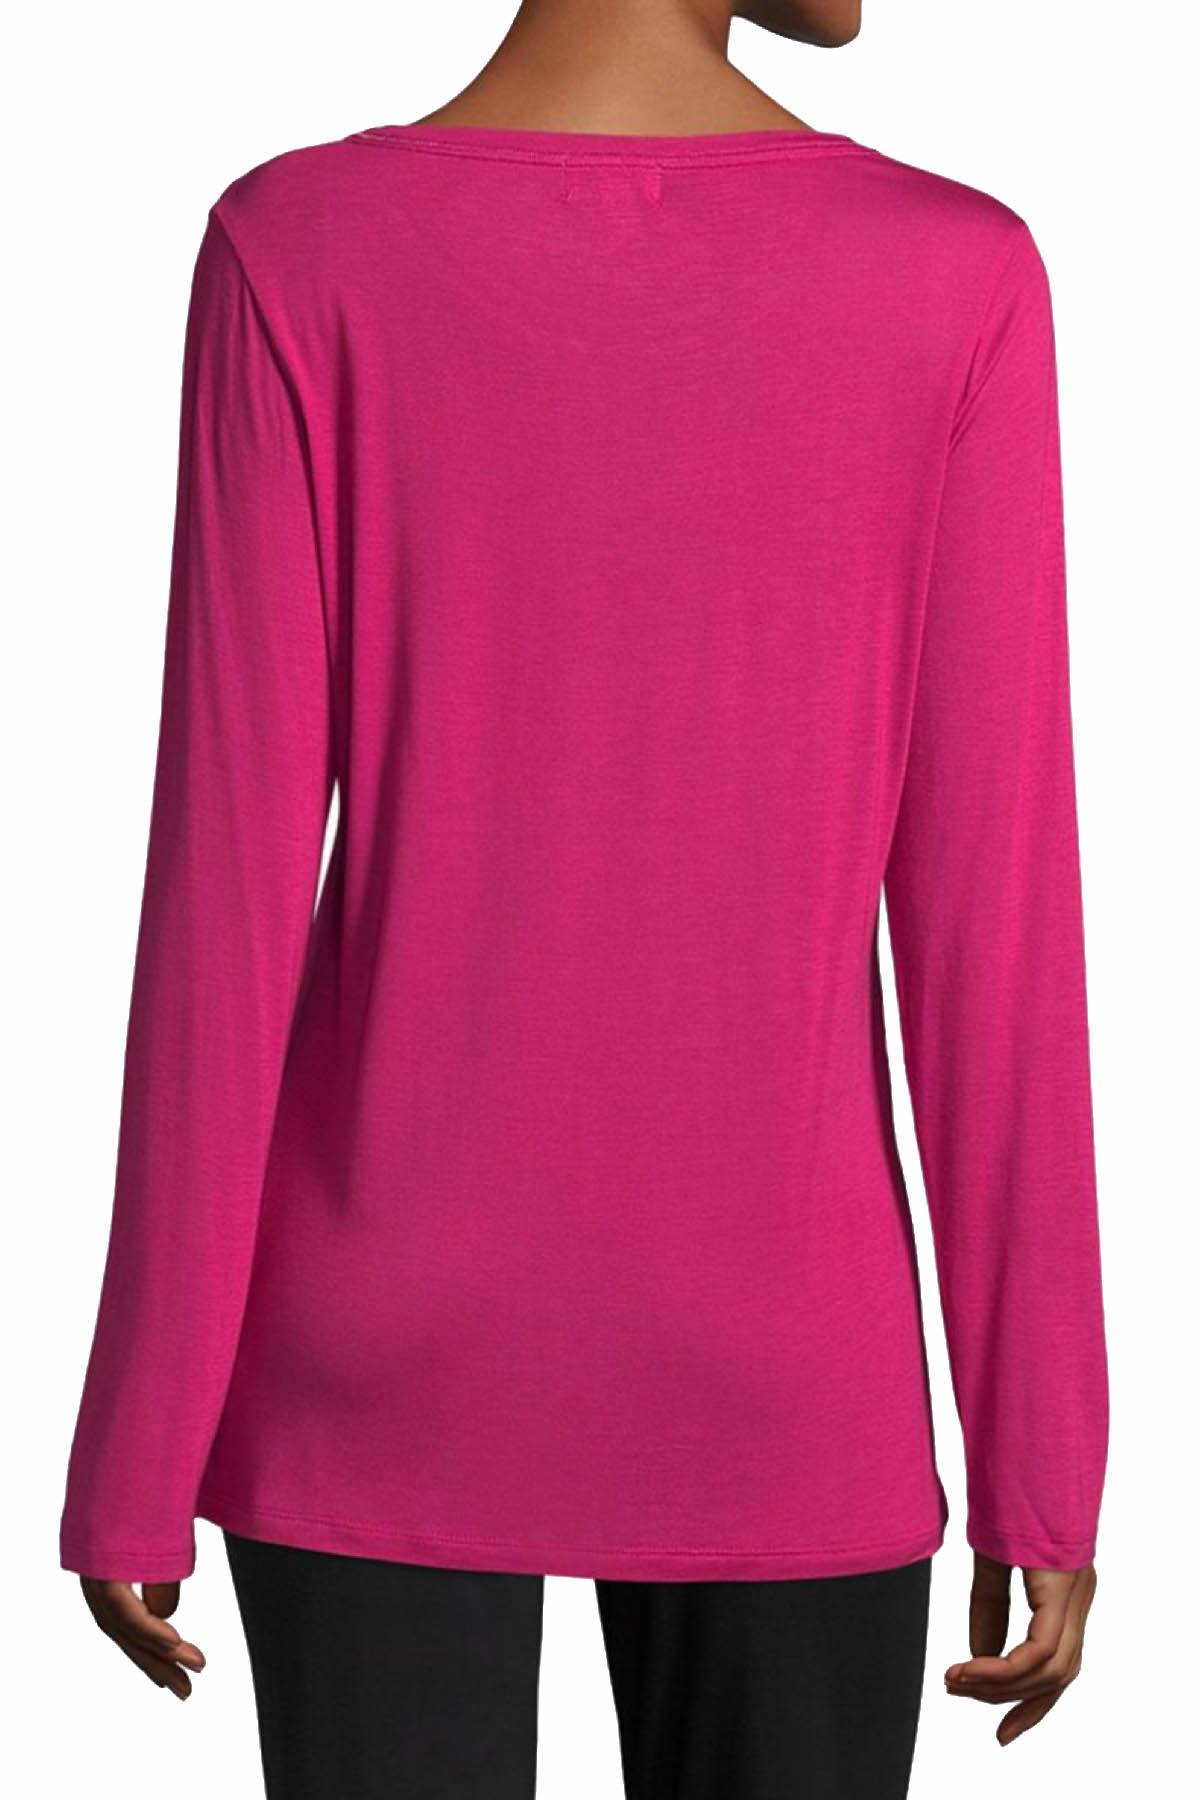 Sesoire Cherry-Pink Lace-Neck Long-Sleeve Lounge Top